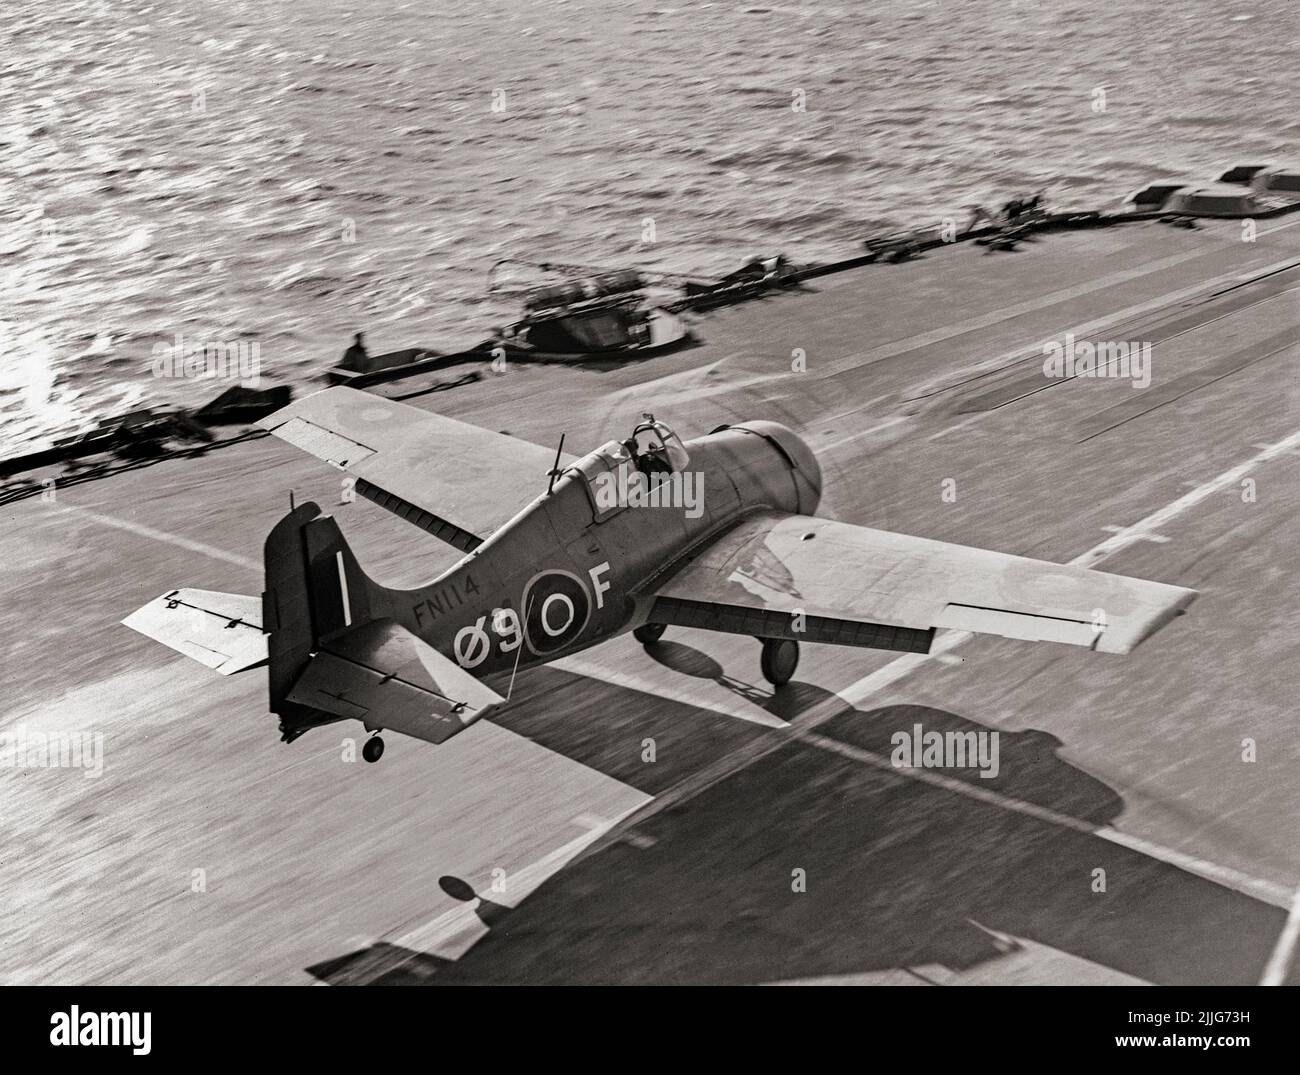 A Grumman Martlet naval fighter of No 888 Squadron Fleet Air Arm taking off from the deck of HMS Formidable in the Mediterranean. Originally called the Grumman F4F Wildcat, the American carrier-based fighter aircraft entered service in 1940 with the United States Navy, and the British Royal Navy where it was initially known as the Martlet. Stock Photo